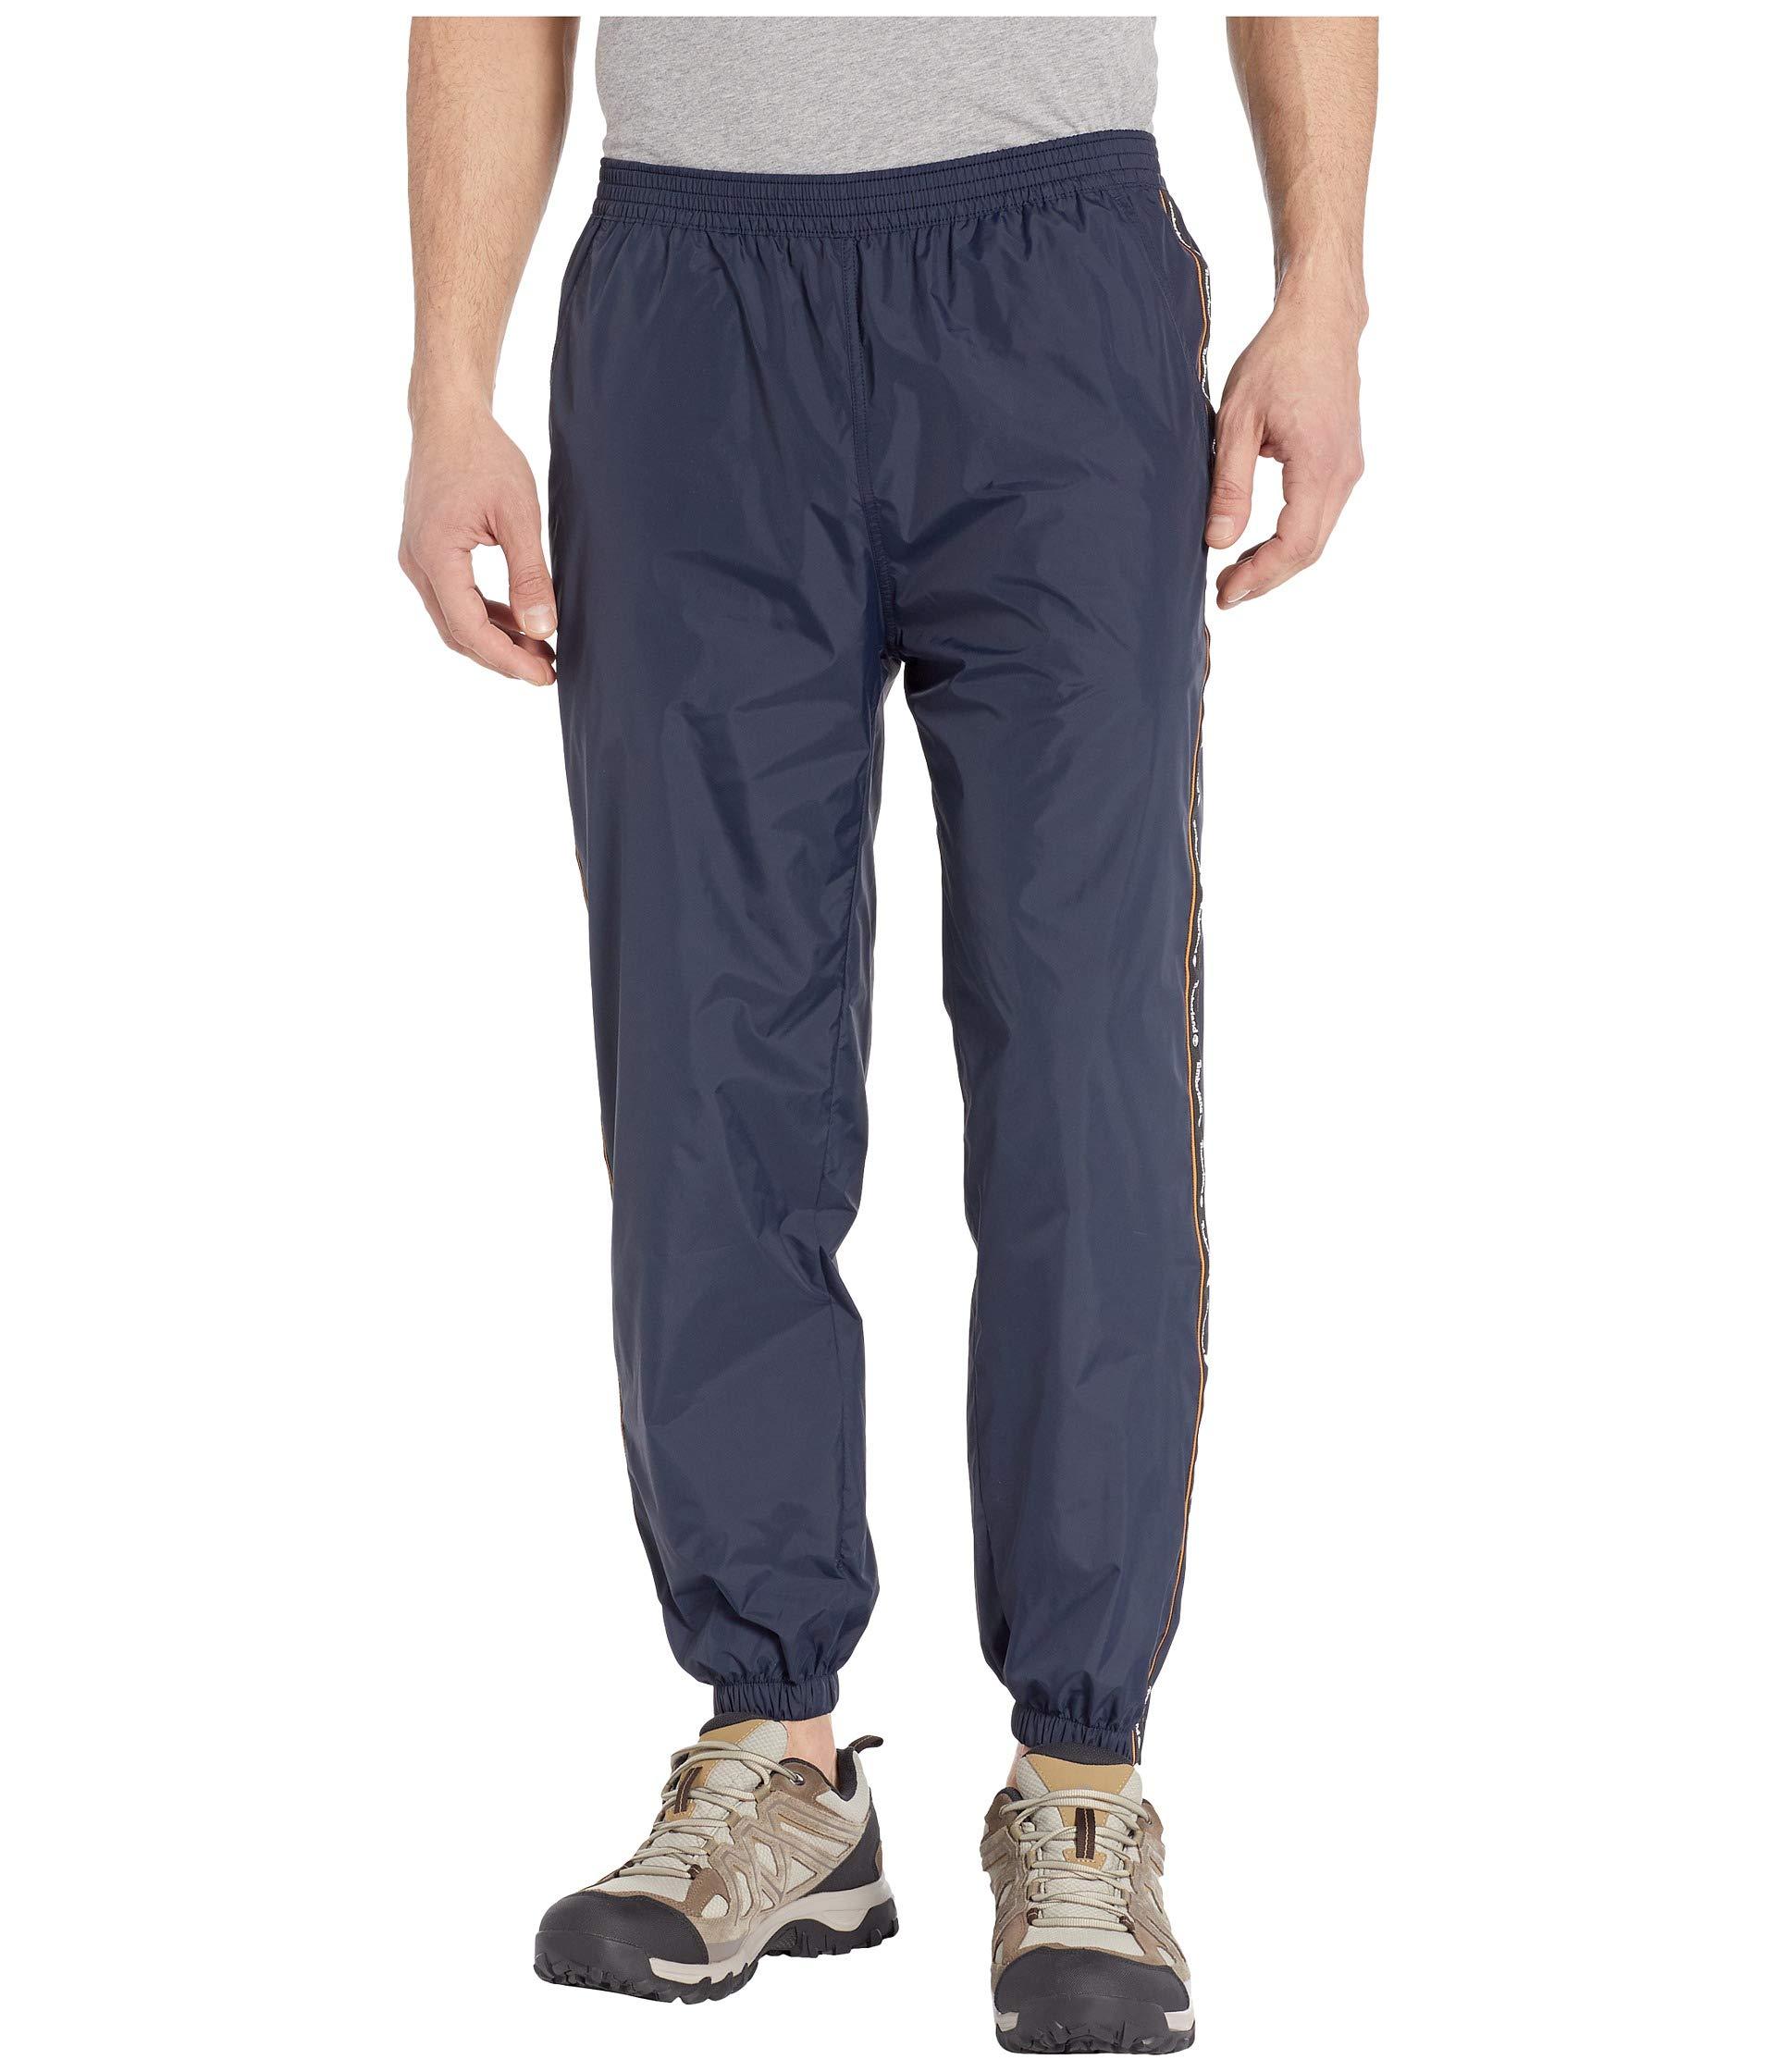 Lyst - Timberland Taped Track Pants (barbados) Men's Casual Pants in ...